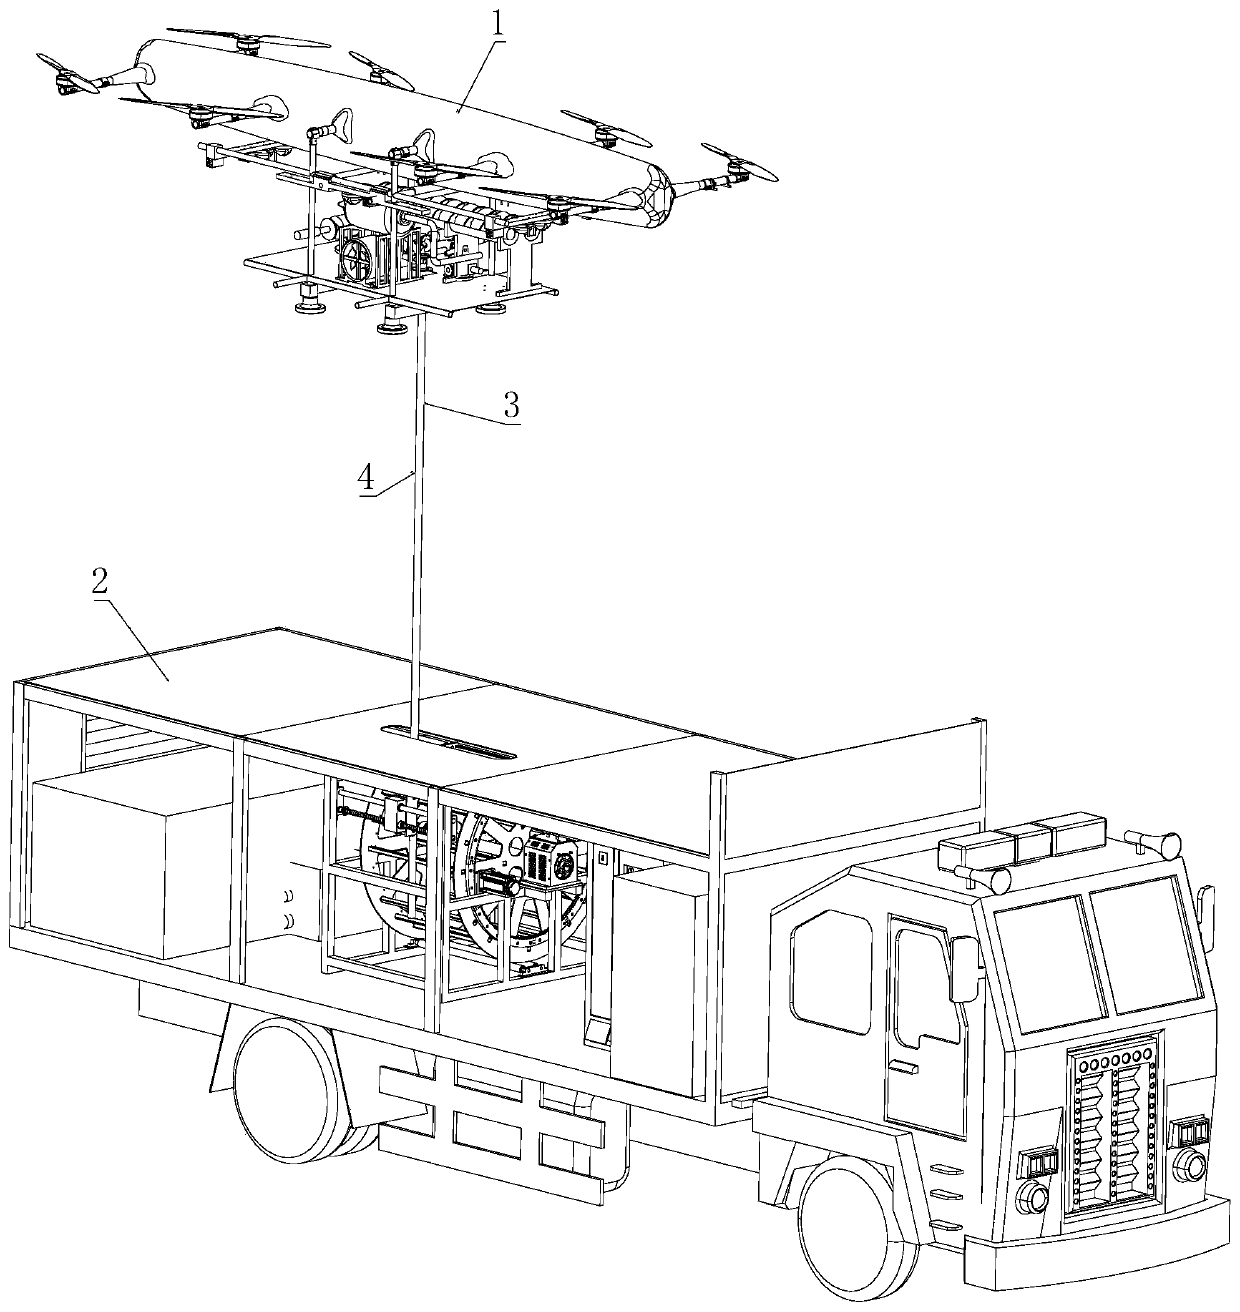 High-altitude mooring unmanned aerial vehicle firefighting rescue system and method